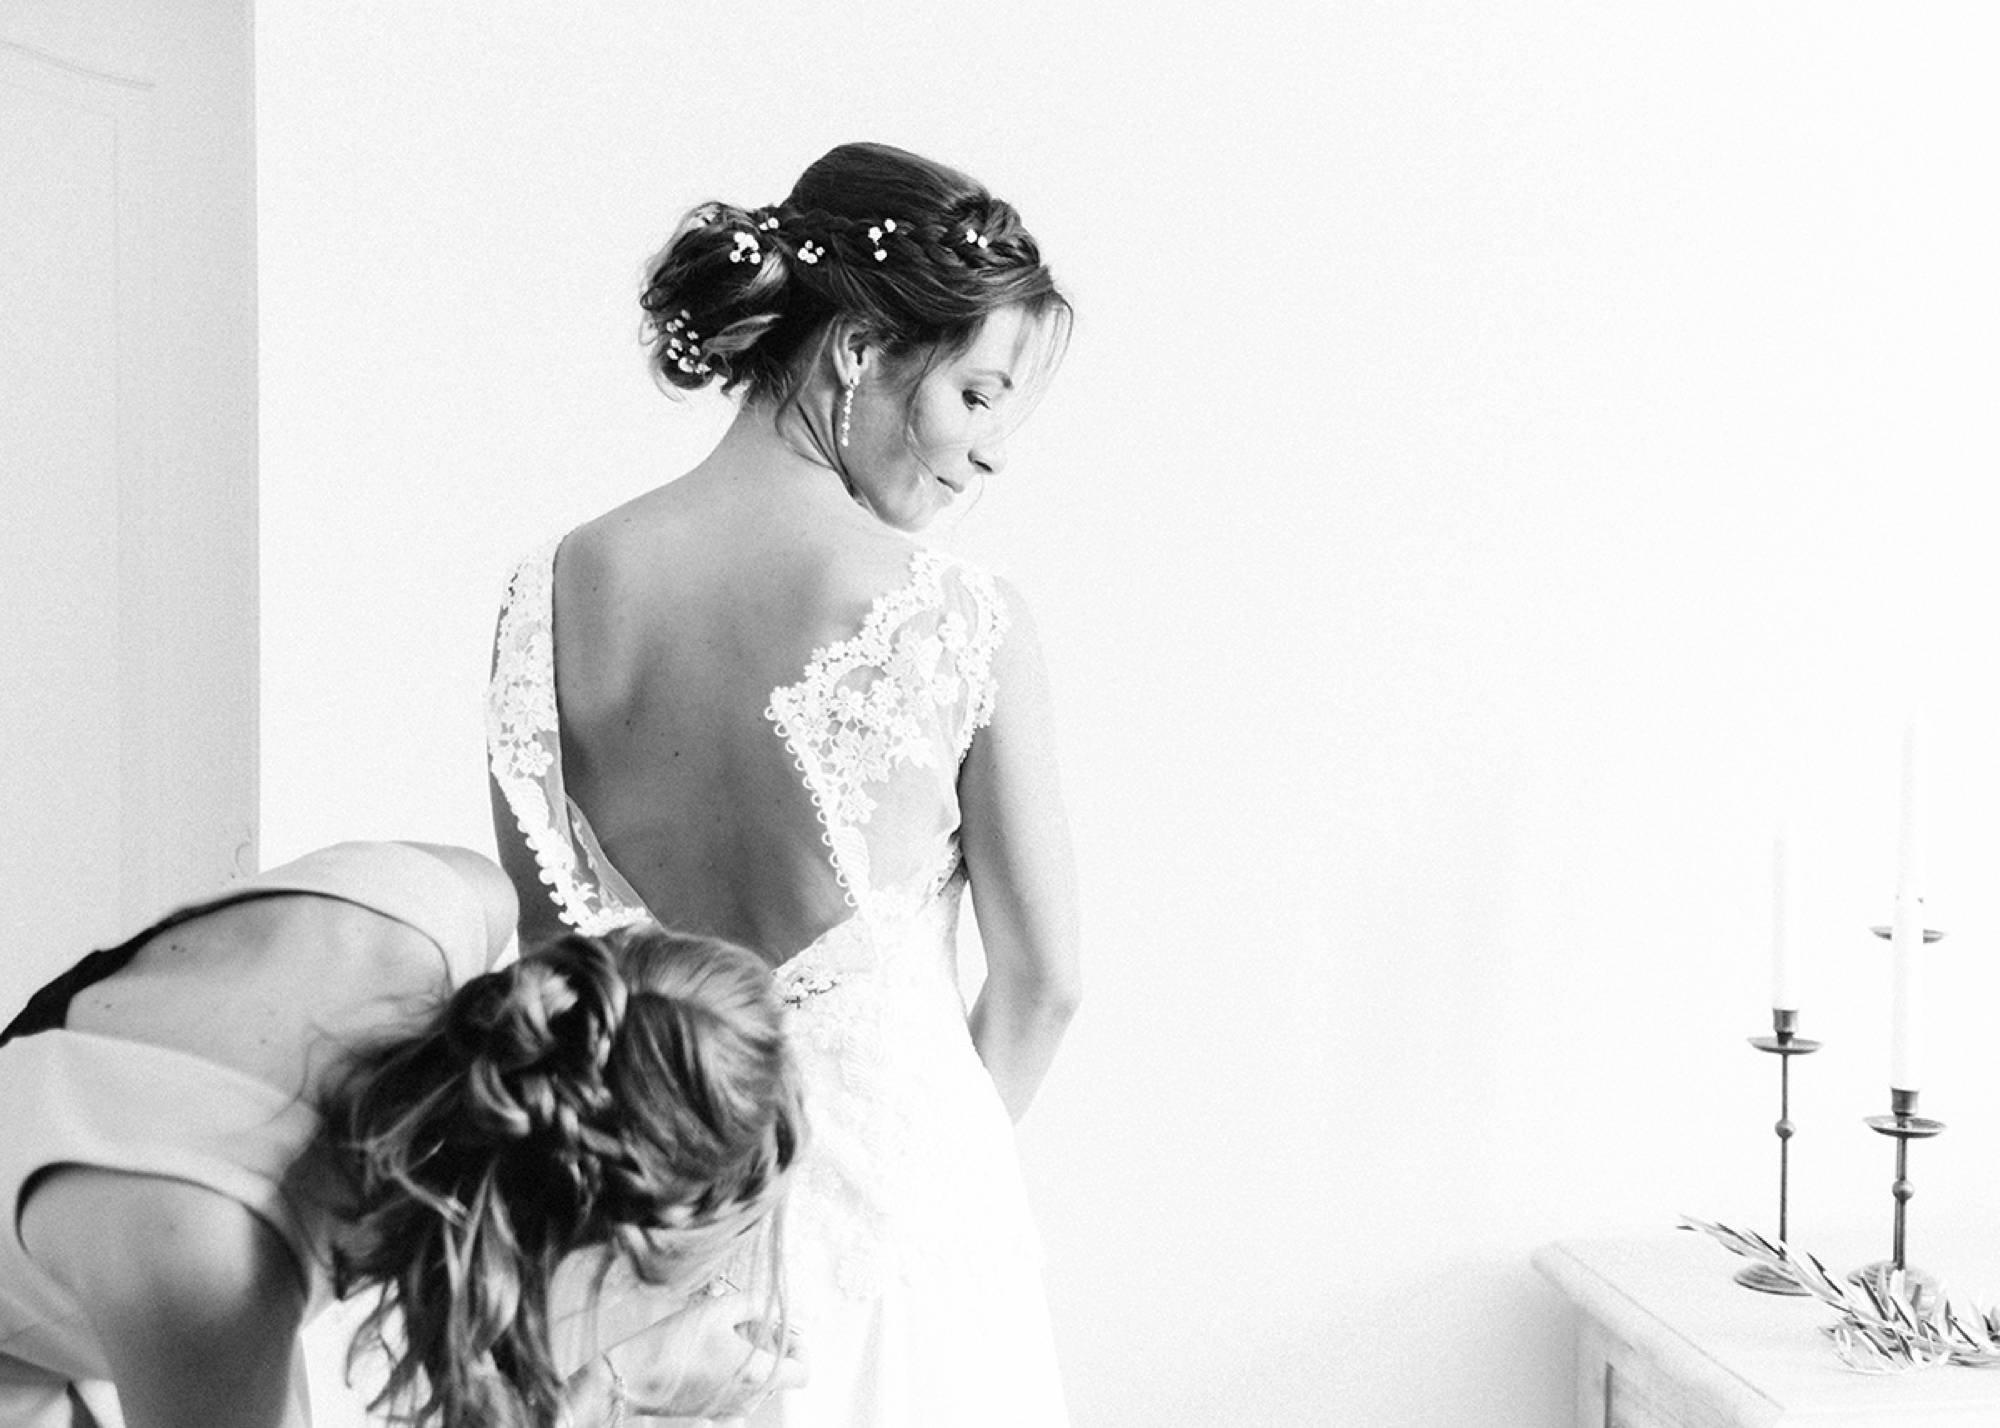 Wedding photographer South of France - Preperations of the bride